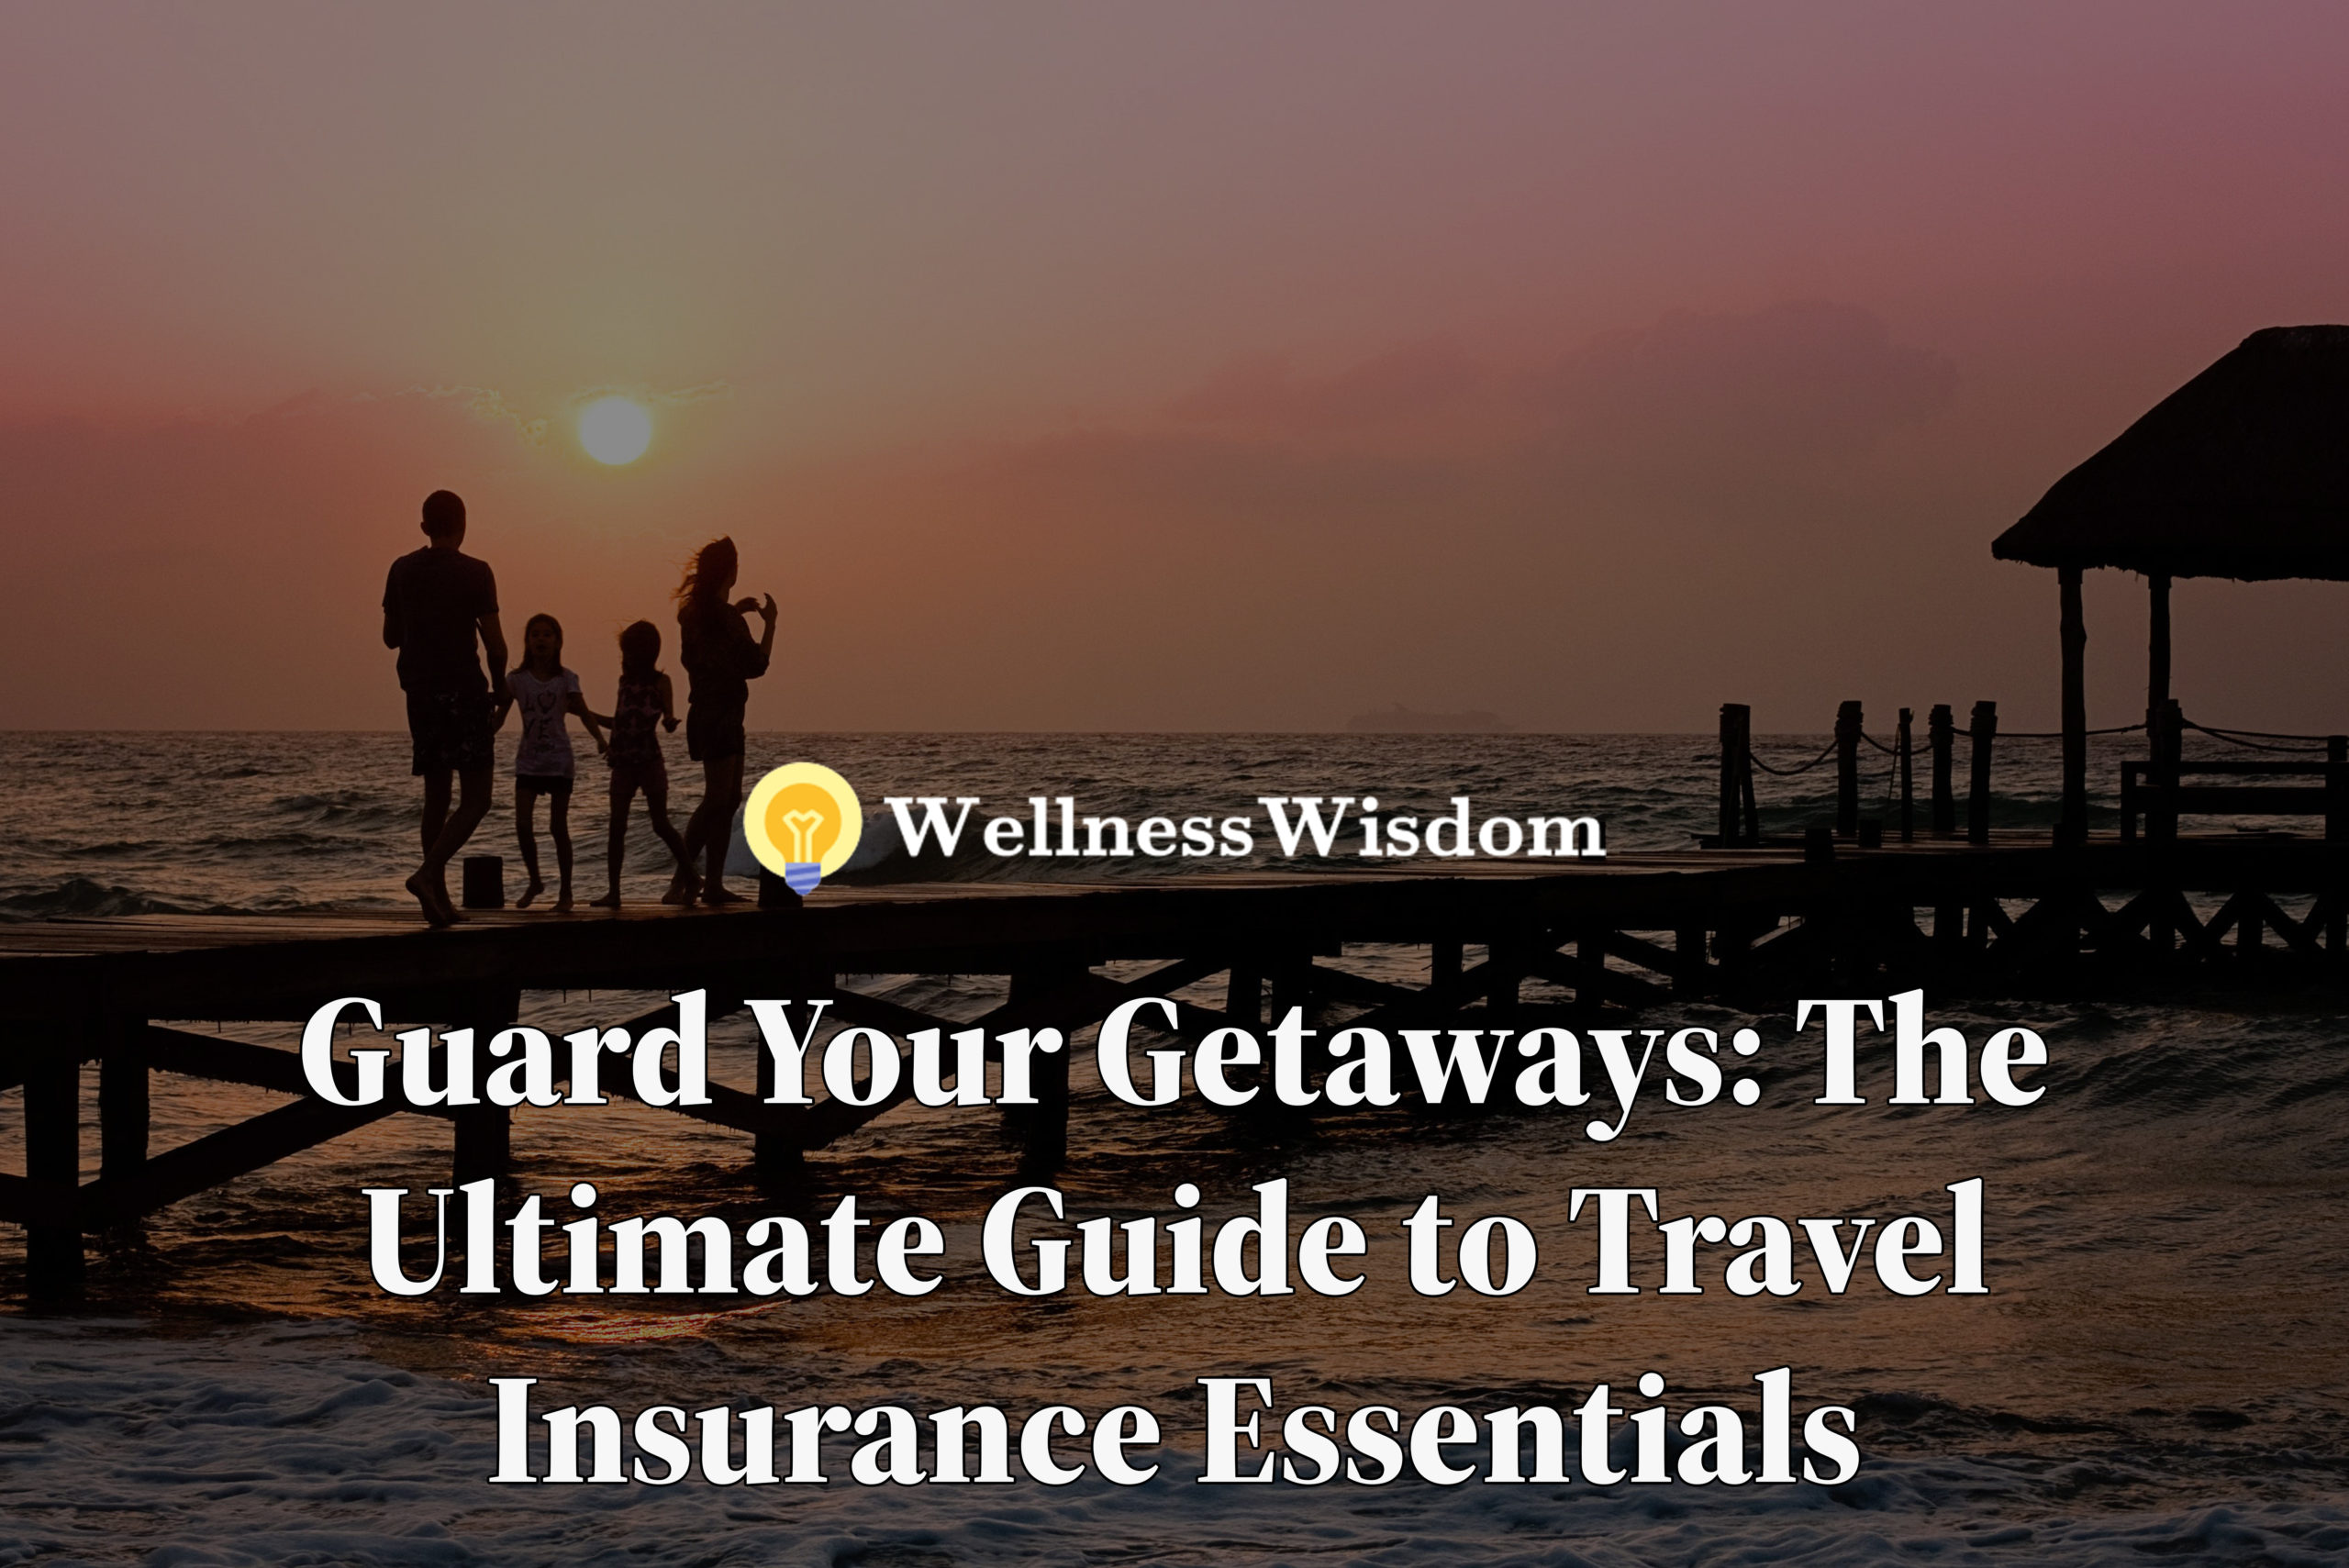 travel insurance, trip cancellation, emergency medical coverage, baggage protection, travel assistance, trip interruption, travel delay, peace of mind, travel essentials, travel planning, travel safety, vacation insurance, travel protection, travel emergencies, travel tips